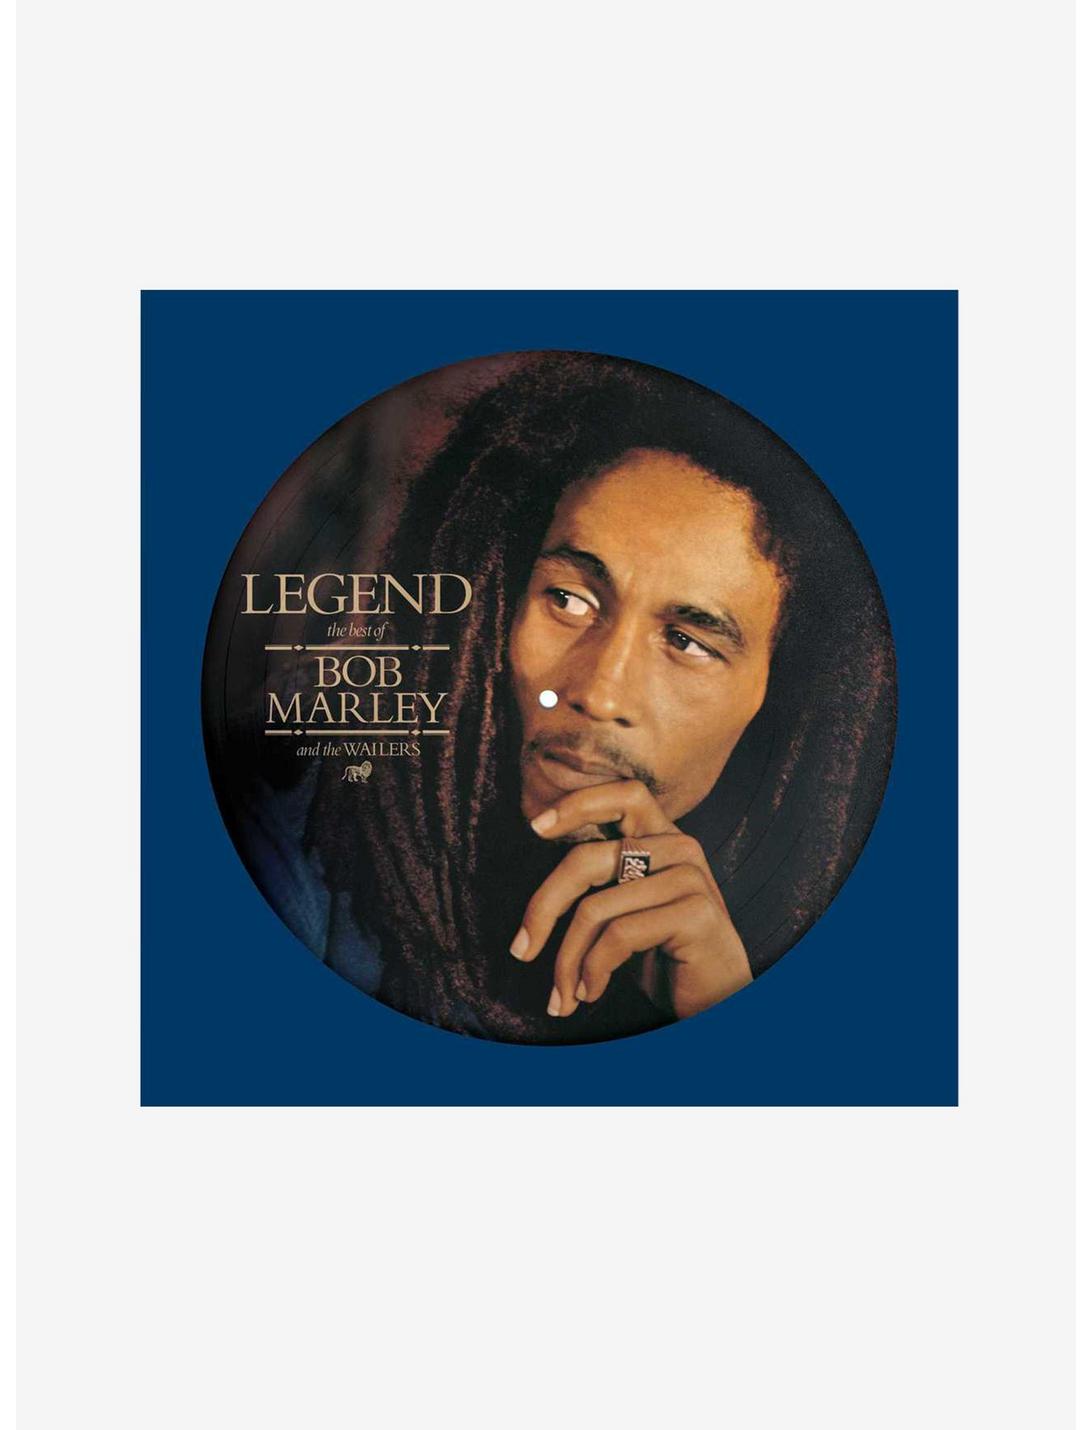 Bob Marley & The Wailers Legend (Picture Disc) LP Vinyl | Hot Topic